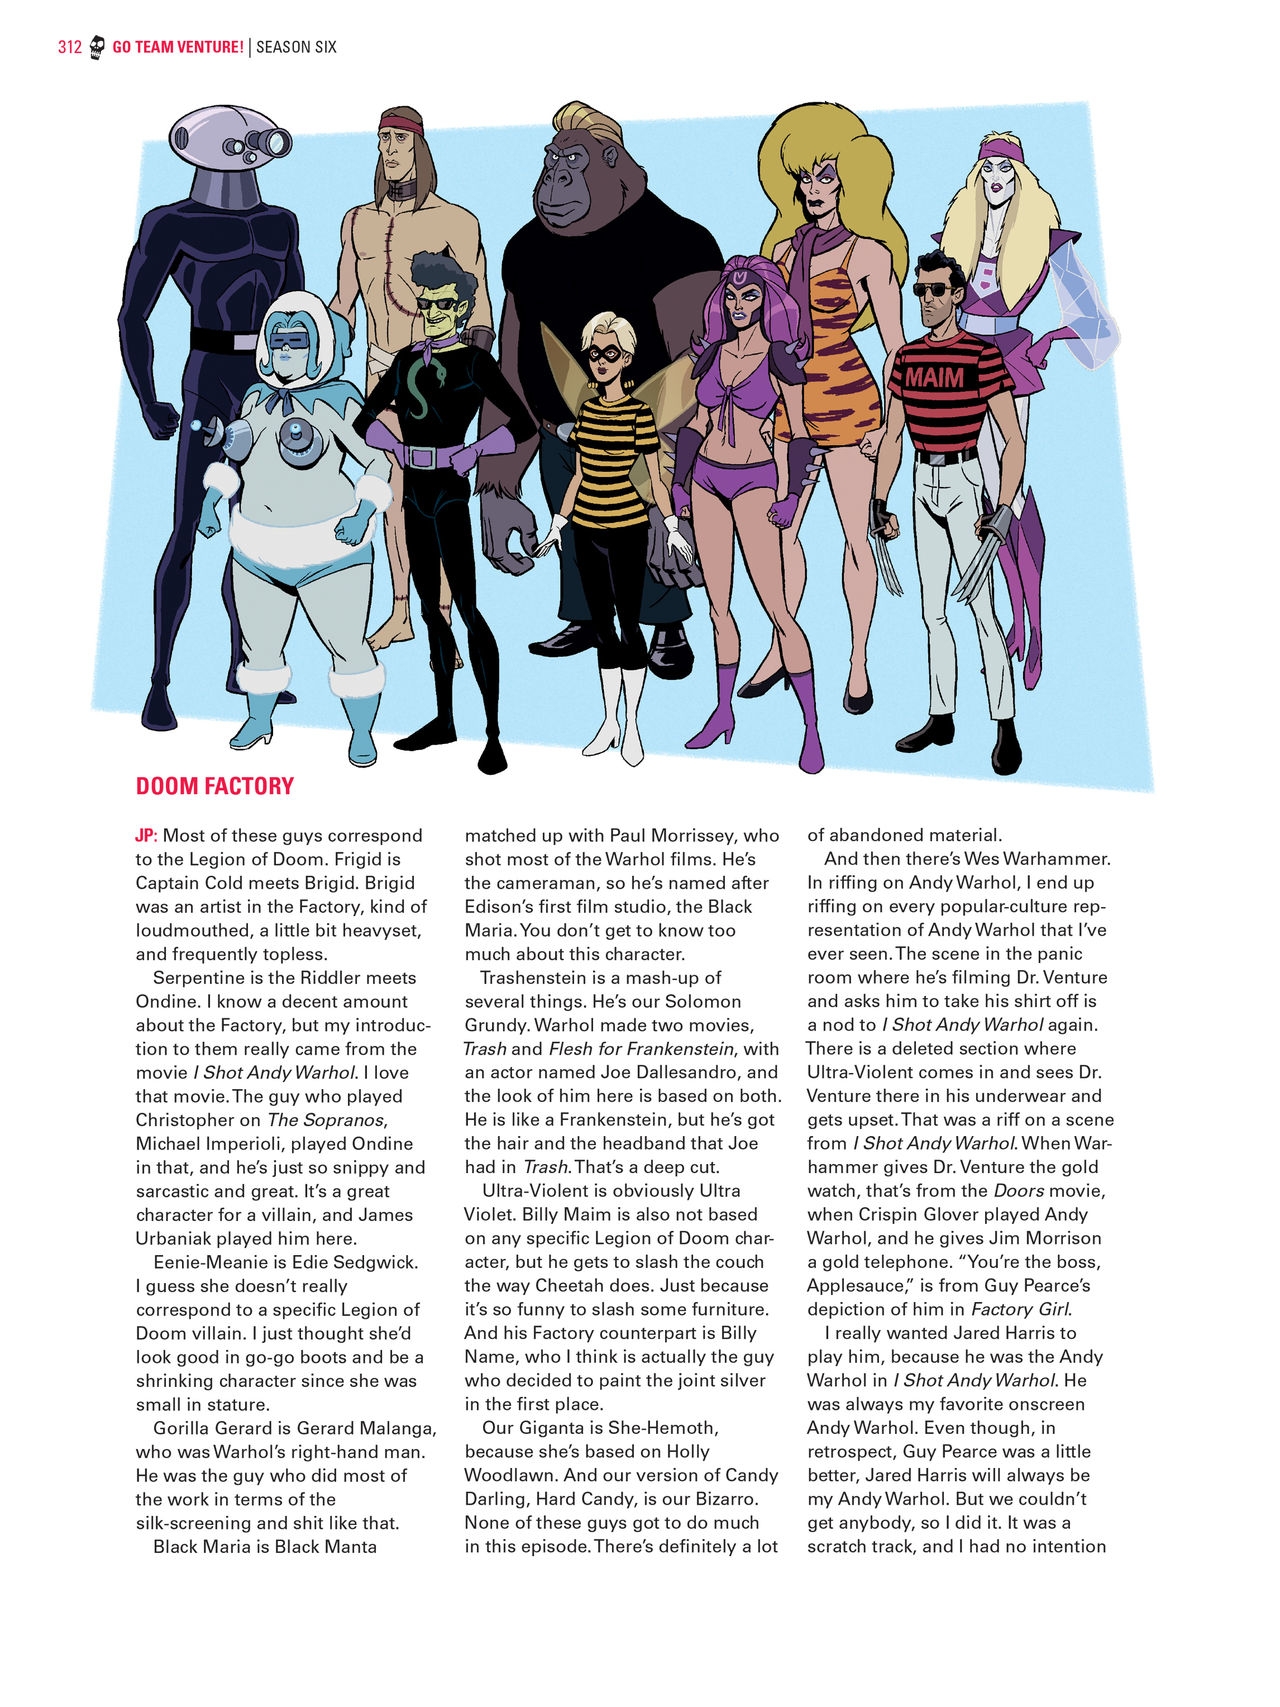 Go Team Venture! - The Art and Making of the Venture Bros 310